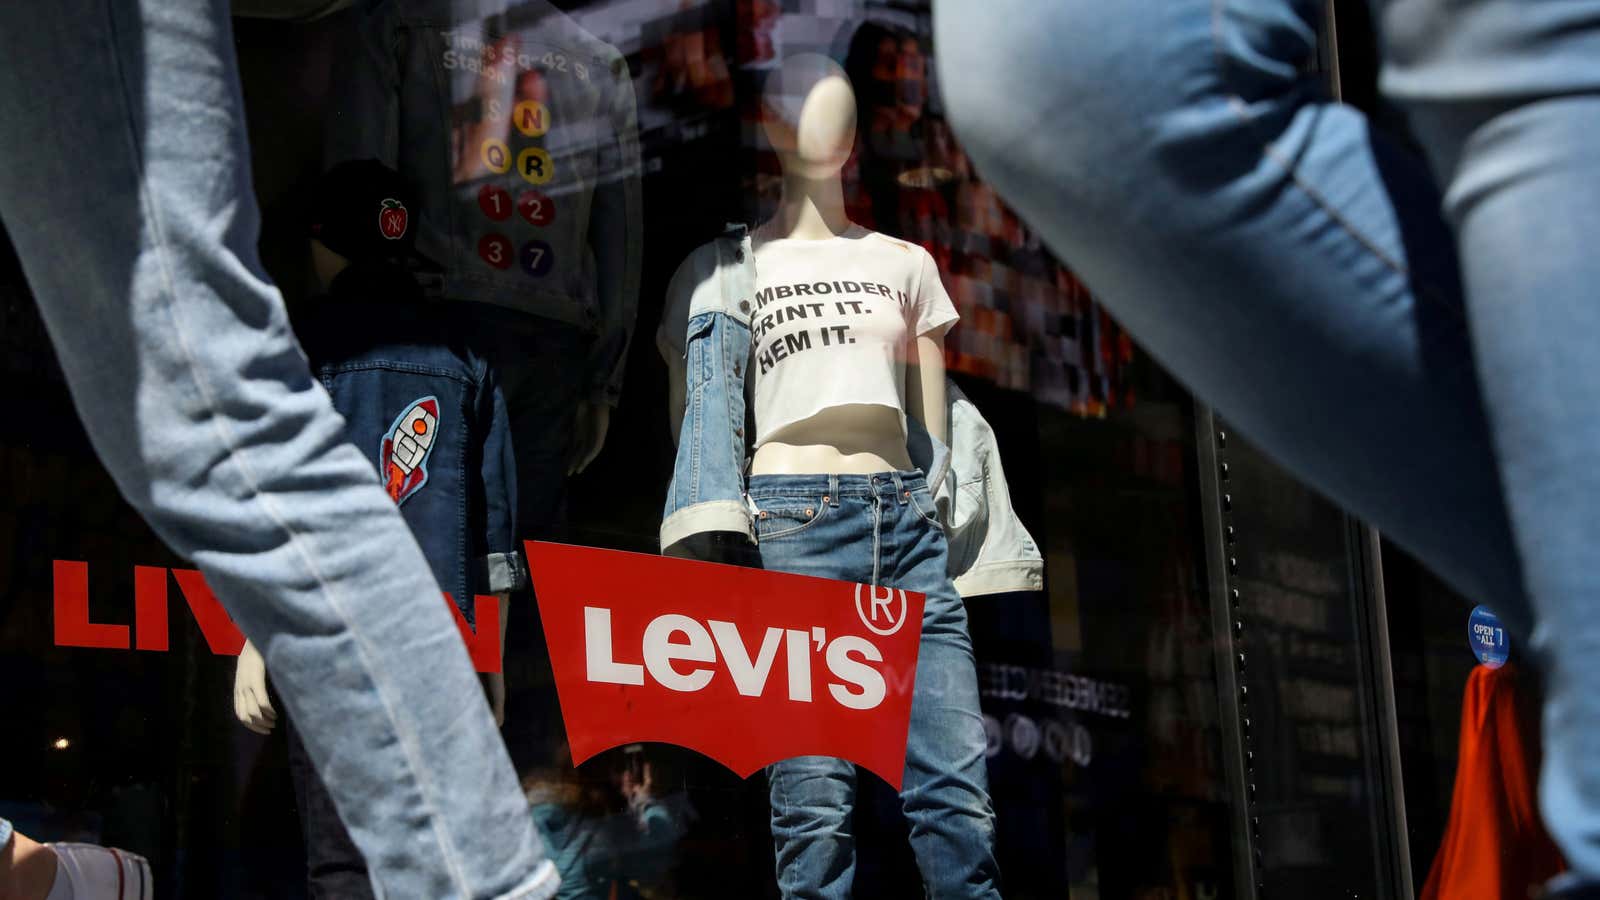 Levi’s CEO Chip Bergh says a quarter of customers have a new size since the pandemic started.